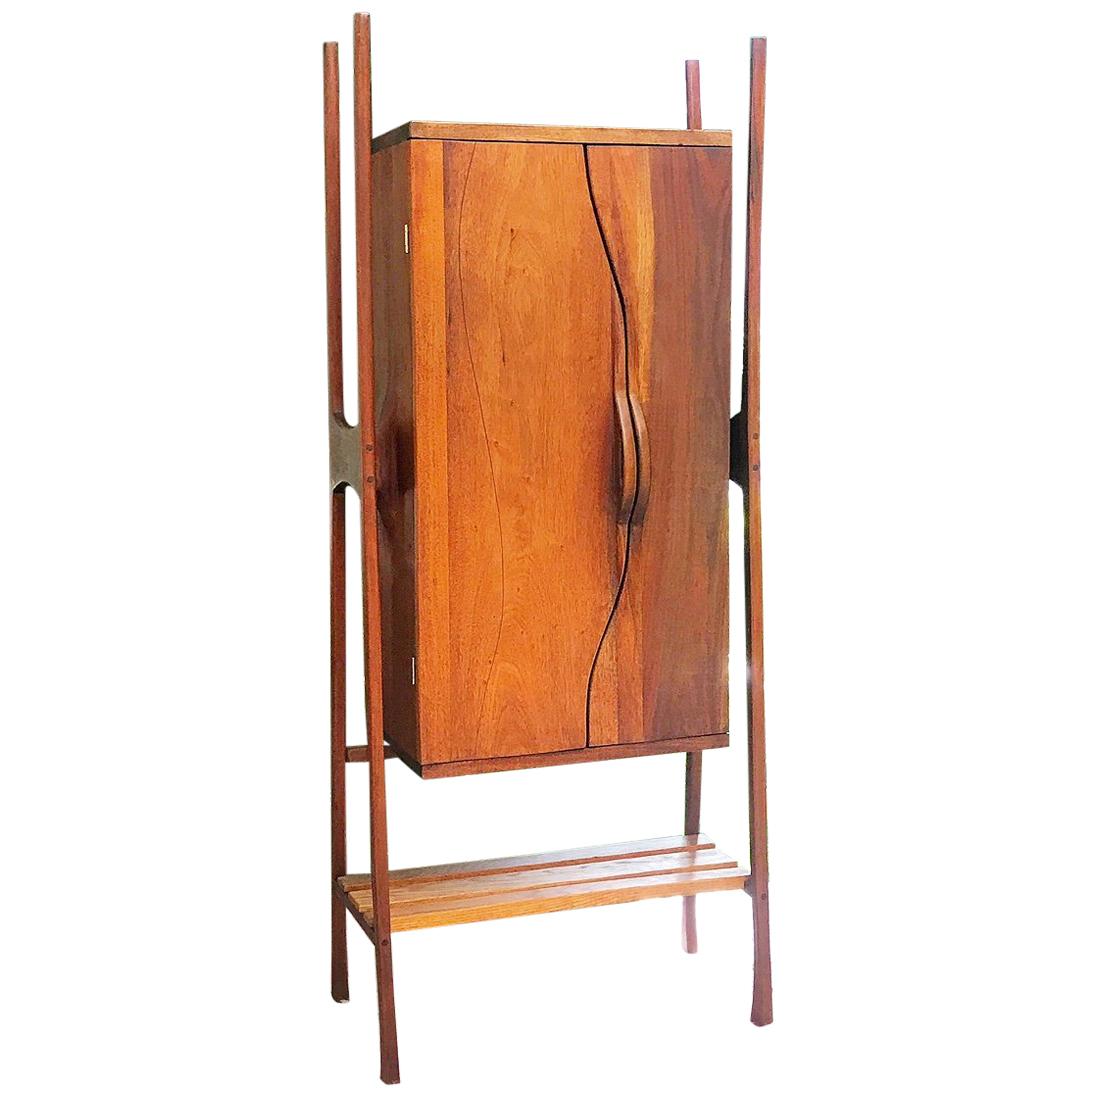 Studio Vintage 1970s Sculptural Mid Century Tall Wood Cabinet Made in Mexico 